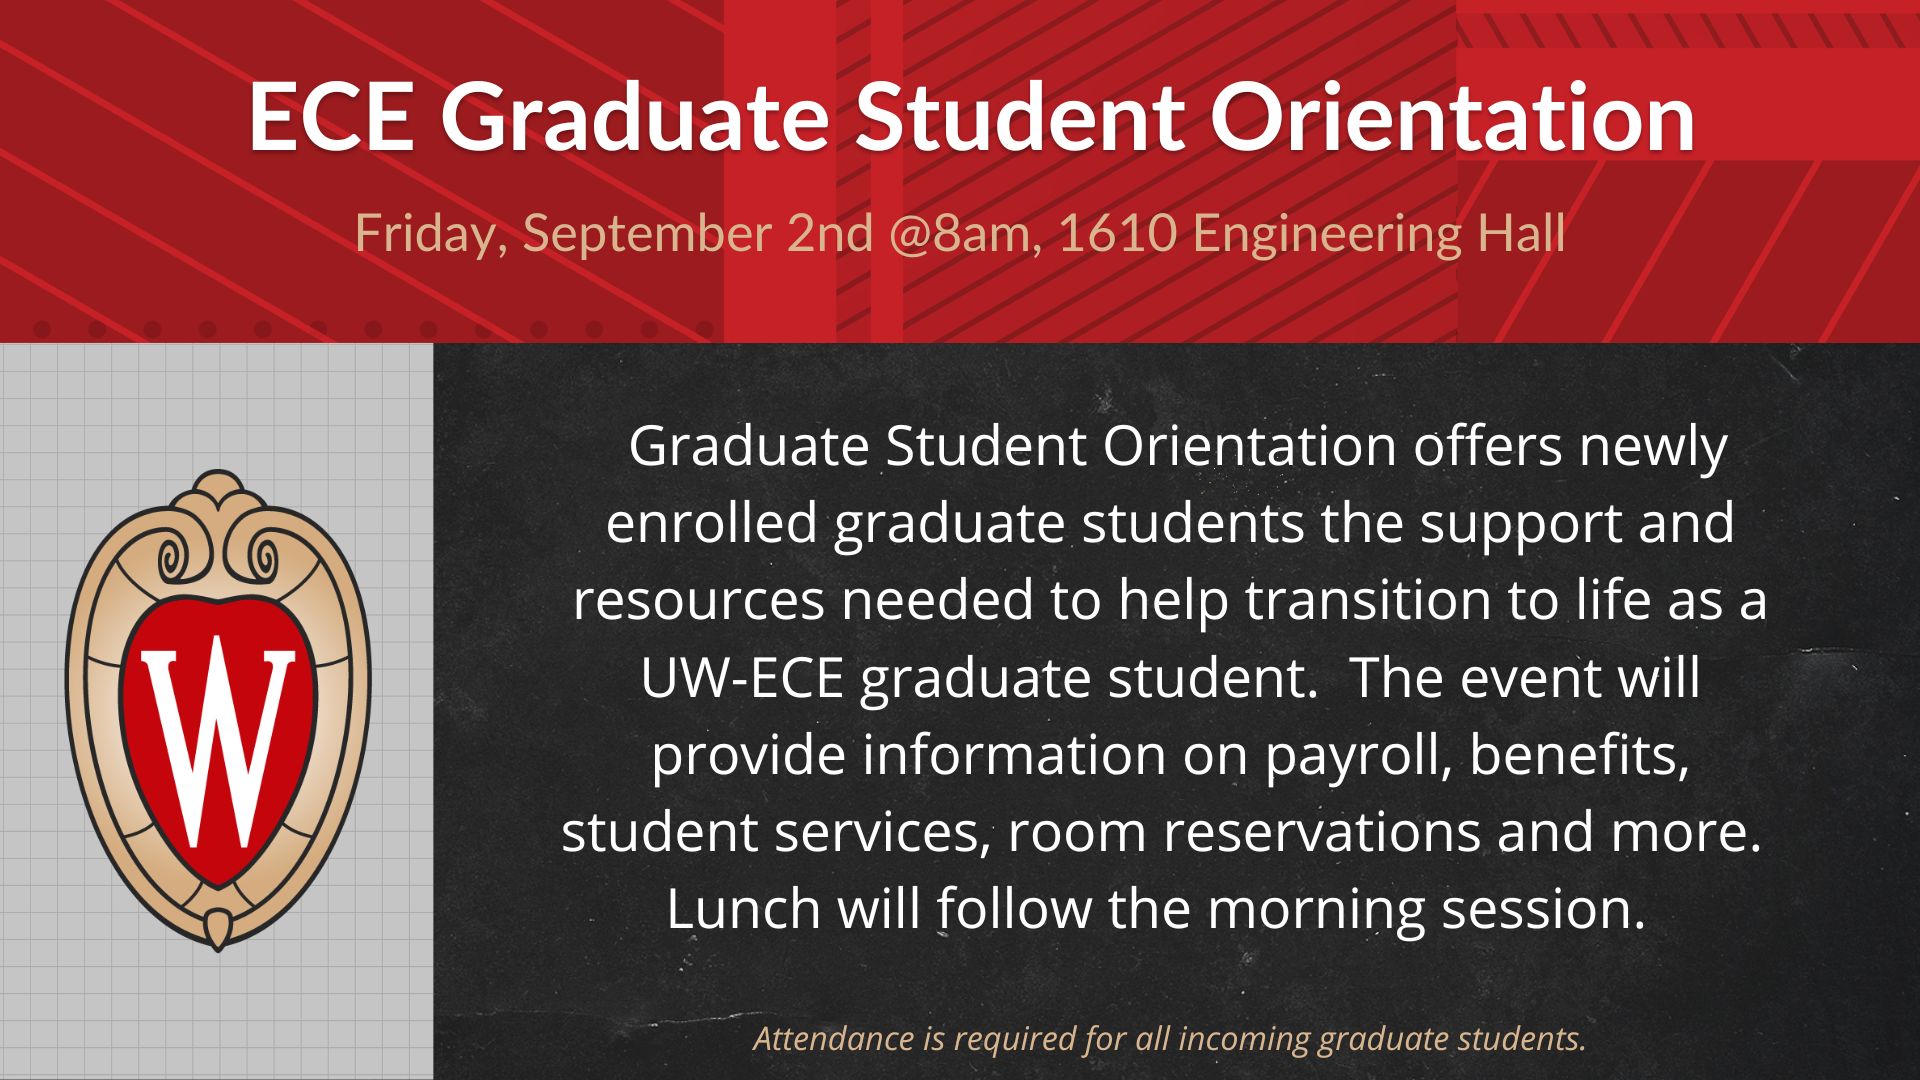 ECE Graduate Student Orientation, Friday, September 2nd @8am, 1610 Engineering Hall, Graduate Student Orientation offers newly enrolled graduate students the support and resources needed to help transition to life as a UW-ECE graduate student. The event will provide information on payroll, benefits, student services, room reservations and more. Lunch will follow the morning session., Attendance is required for all incoming graduate students.